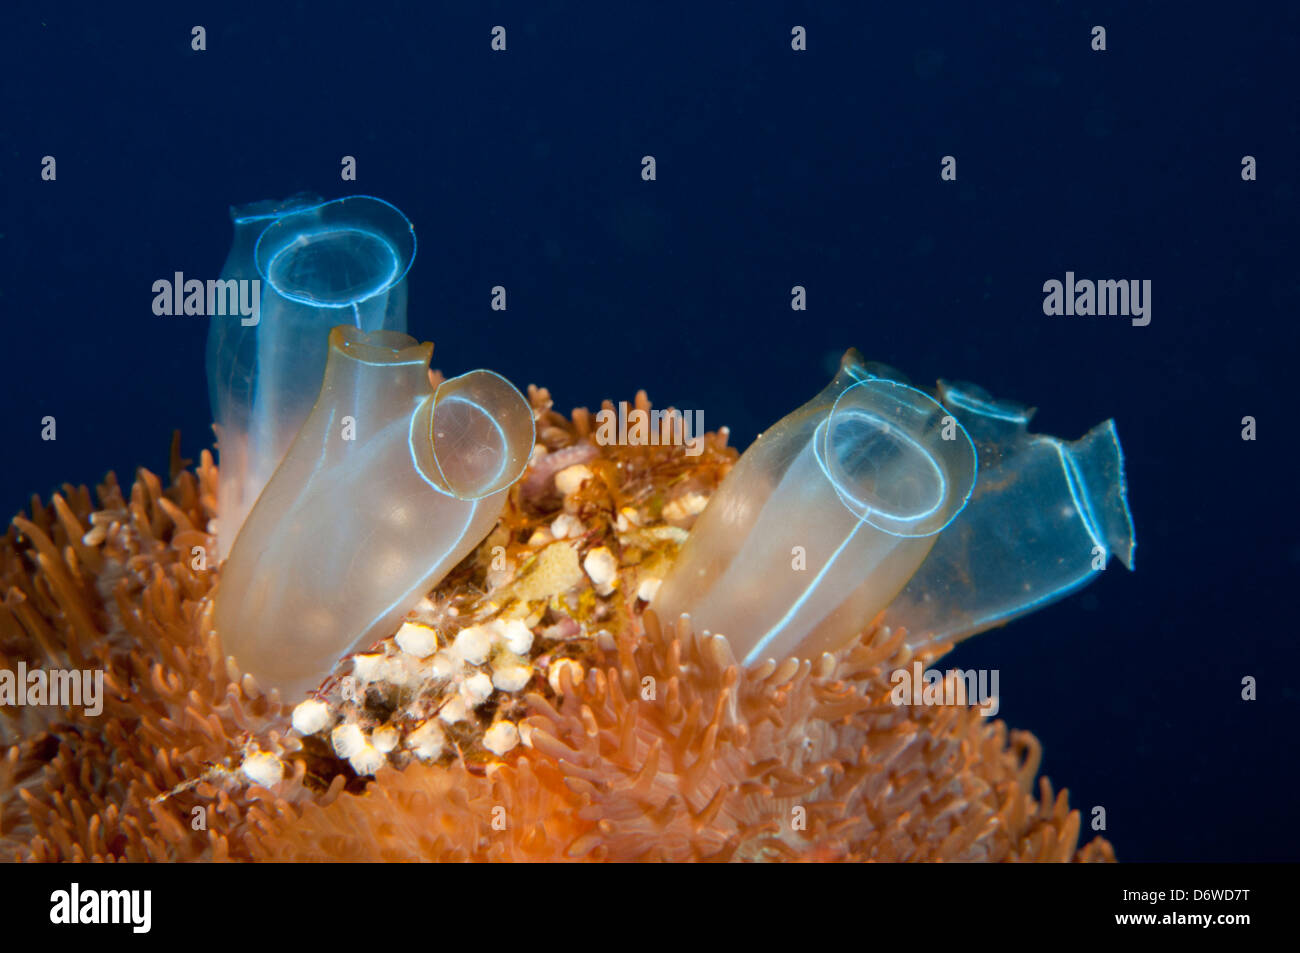 Sea Squirts also known as tunicates filter feeding while attached to rocky reef outcrop Stock Photo